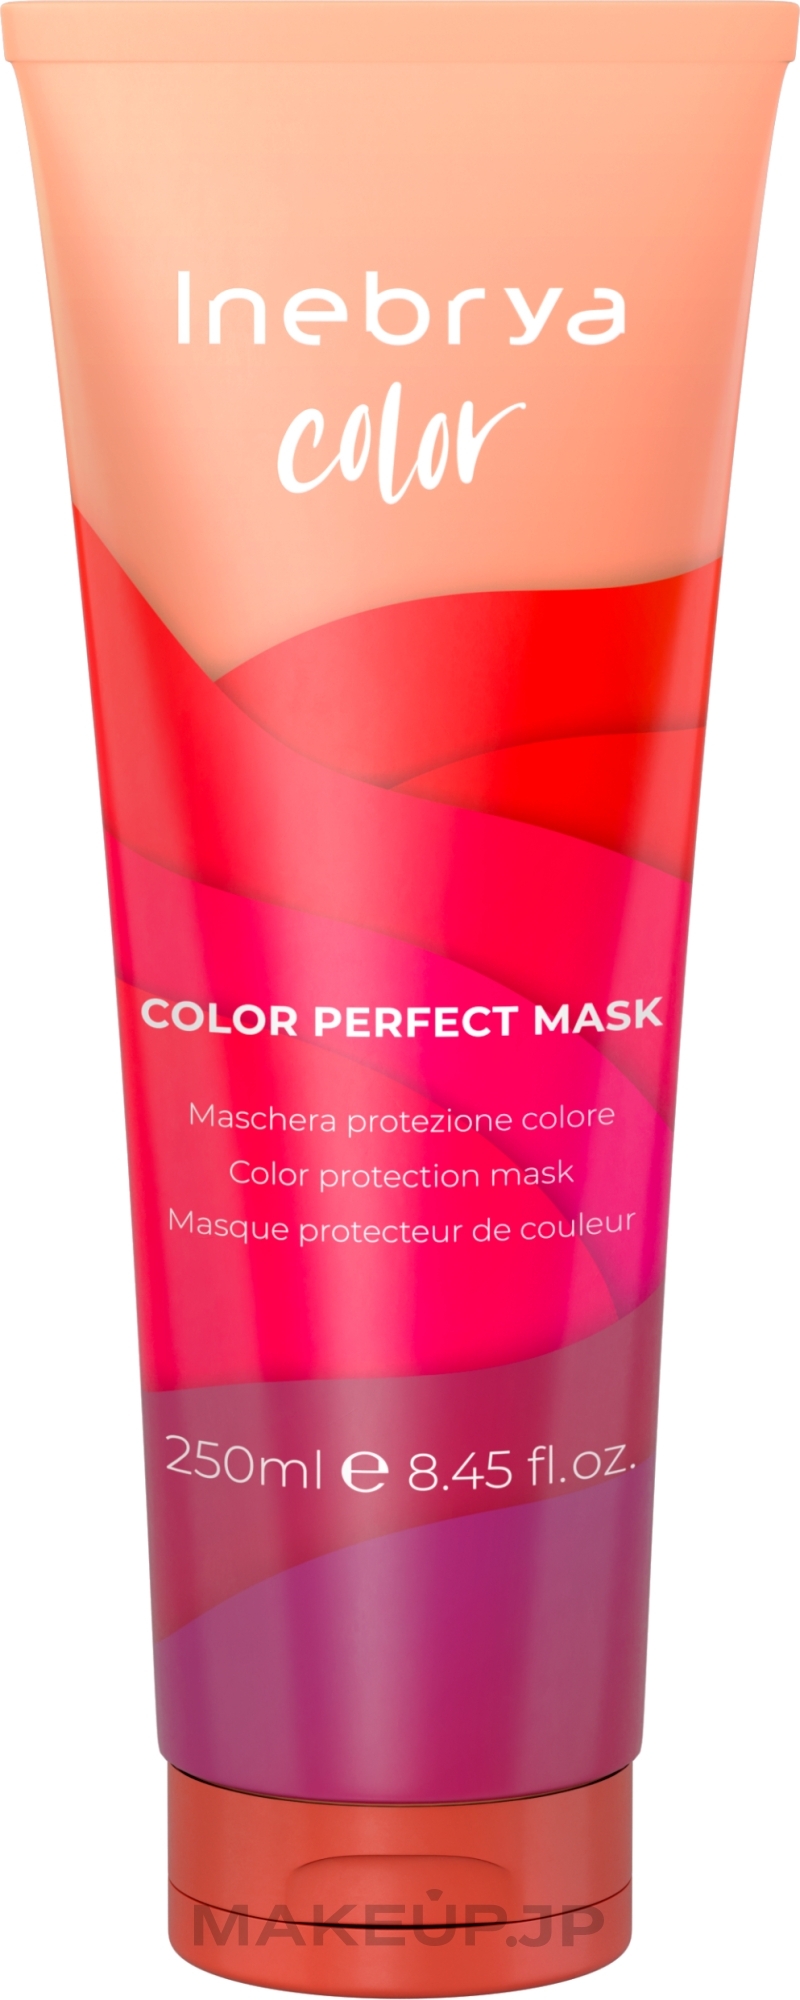 Color Protection Mask - Inebrya Color Perfect Mask — photo 250 ml